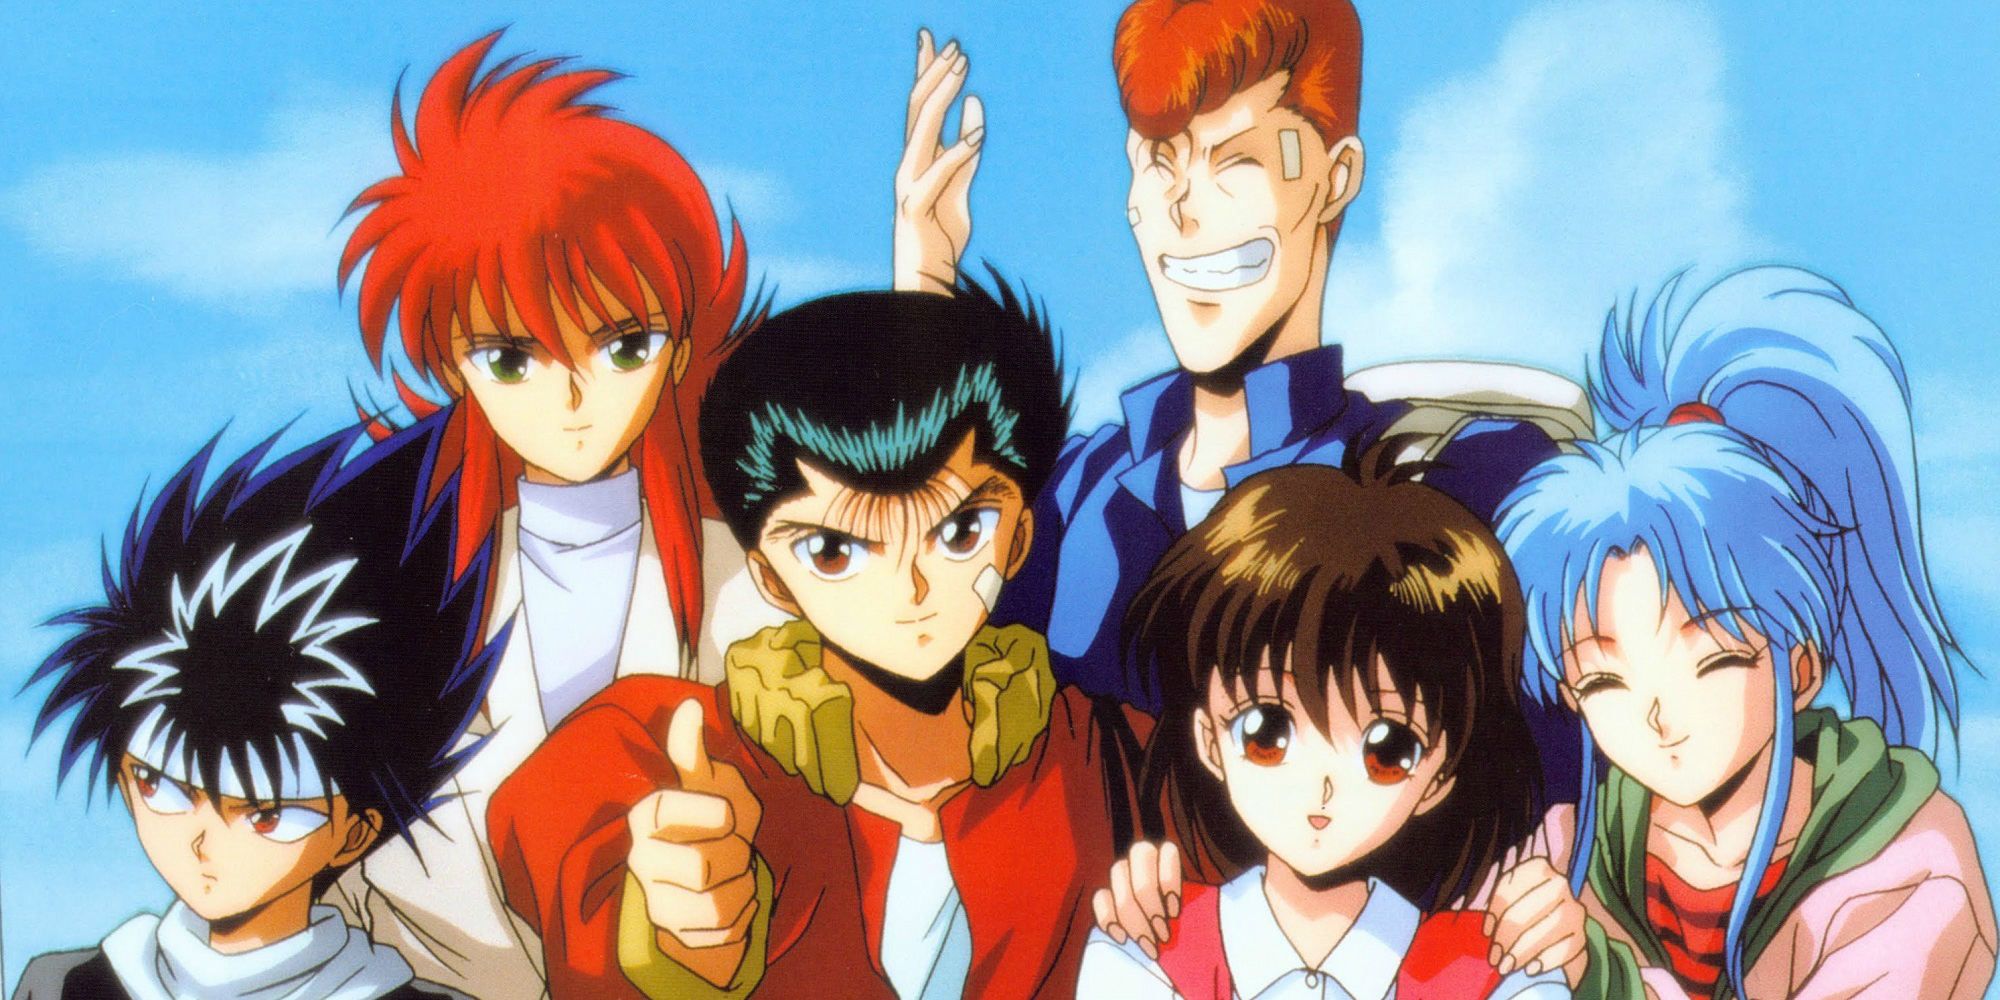 A live-action Yu Yu Hakusho series is being developed for Netflix